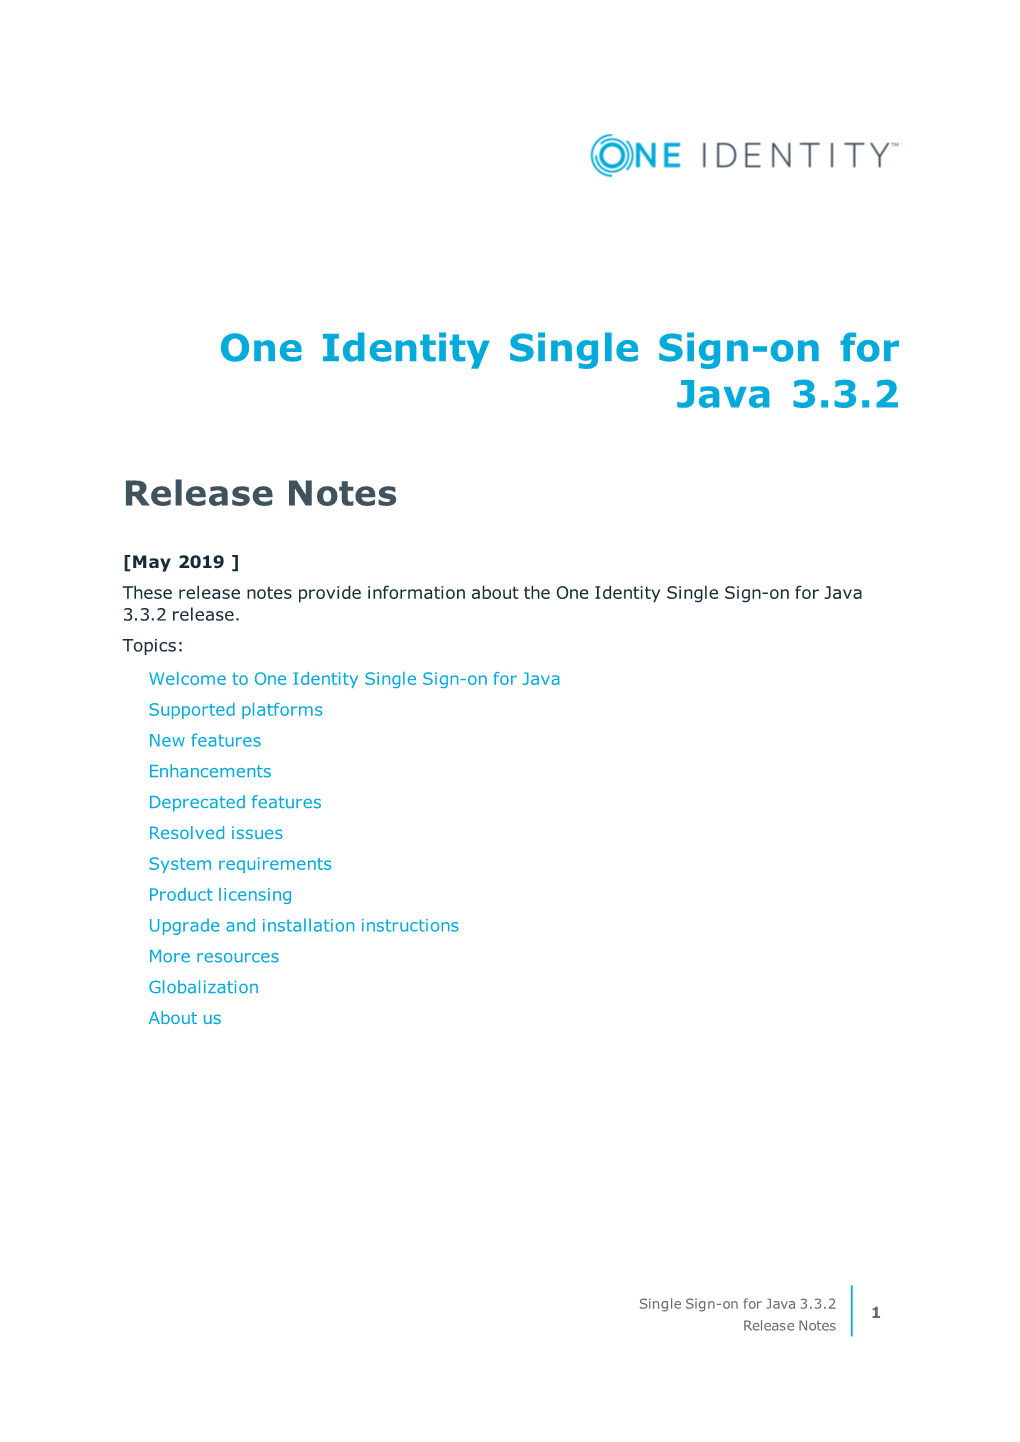 One Identity Single Sign-On for Java 3.3.2 Release Notes